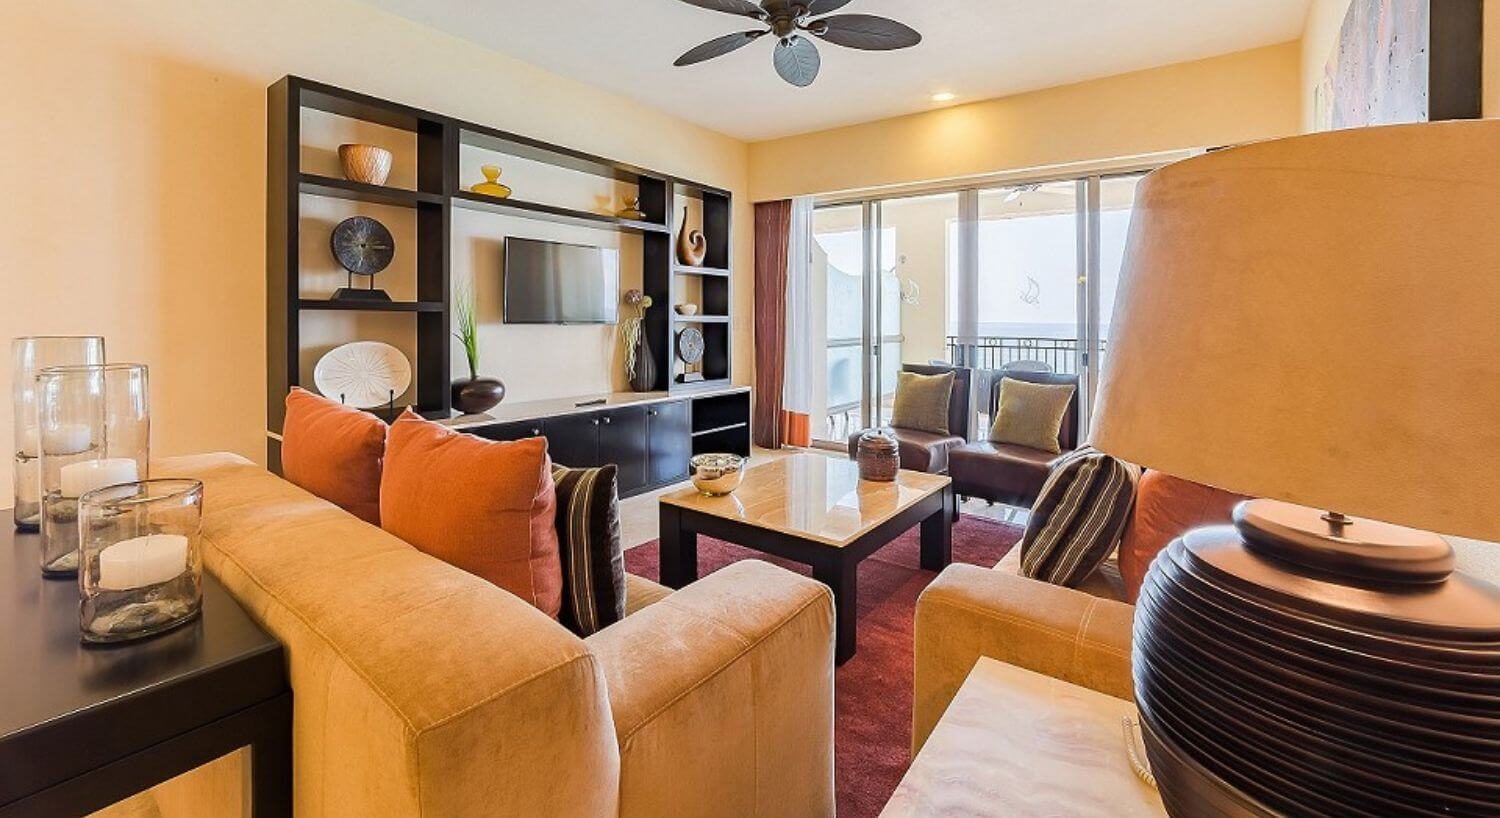 A living room with comfortable plush tan sofas and leather chairs with orange and brown accent pillows, marble coffee table and side table with lamps, an entertainment center with flat screen TV and shell and pottery accents, and sliding doors leading out to a balcony with ocean views.